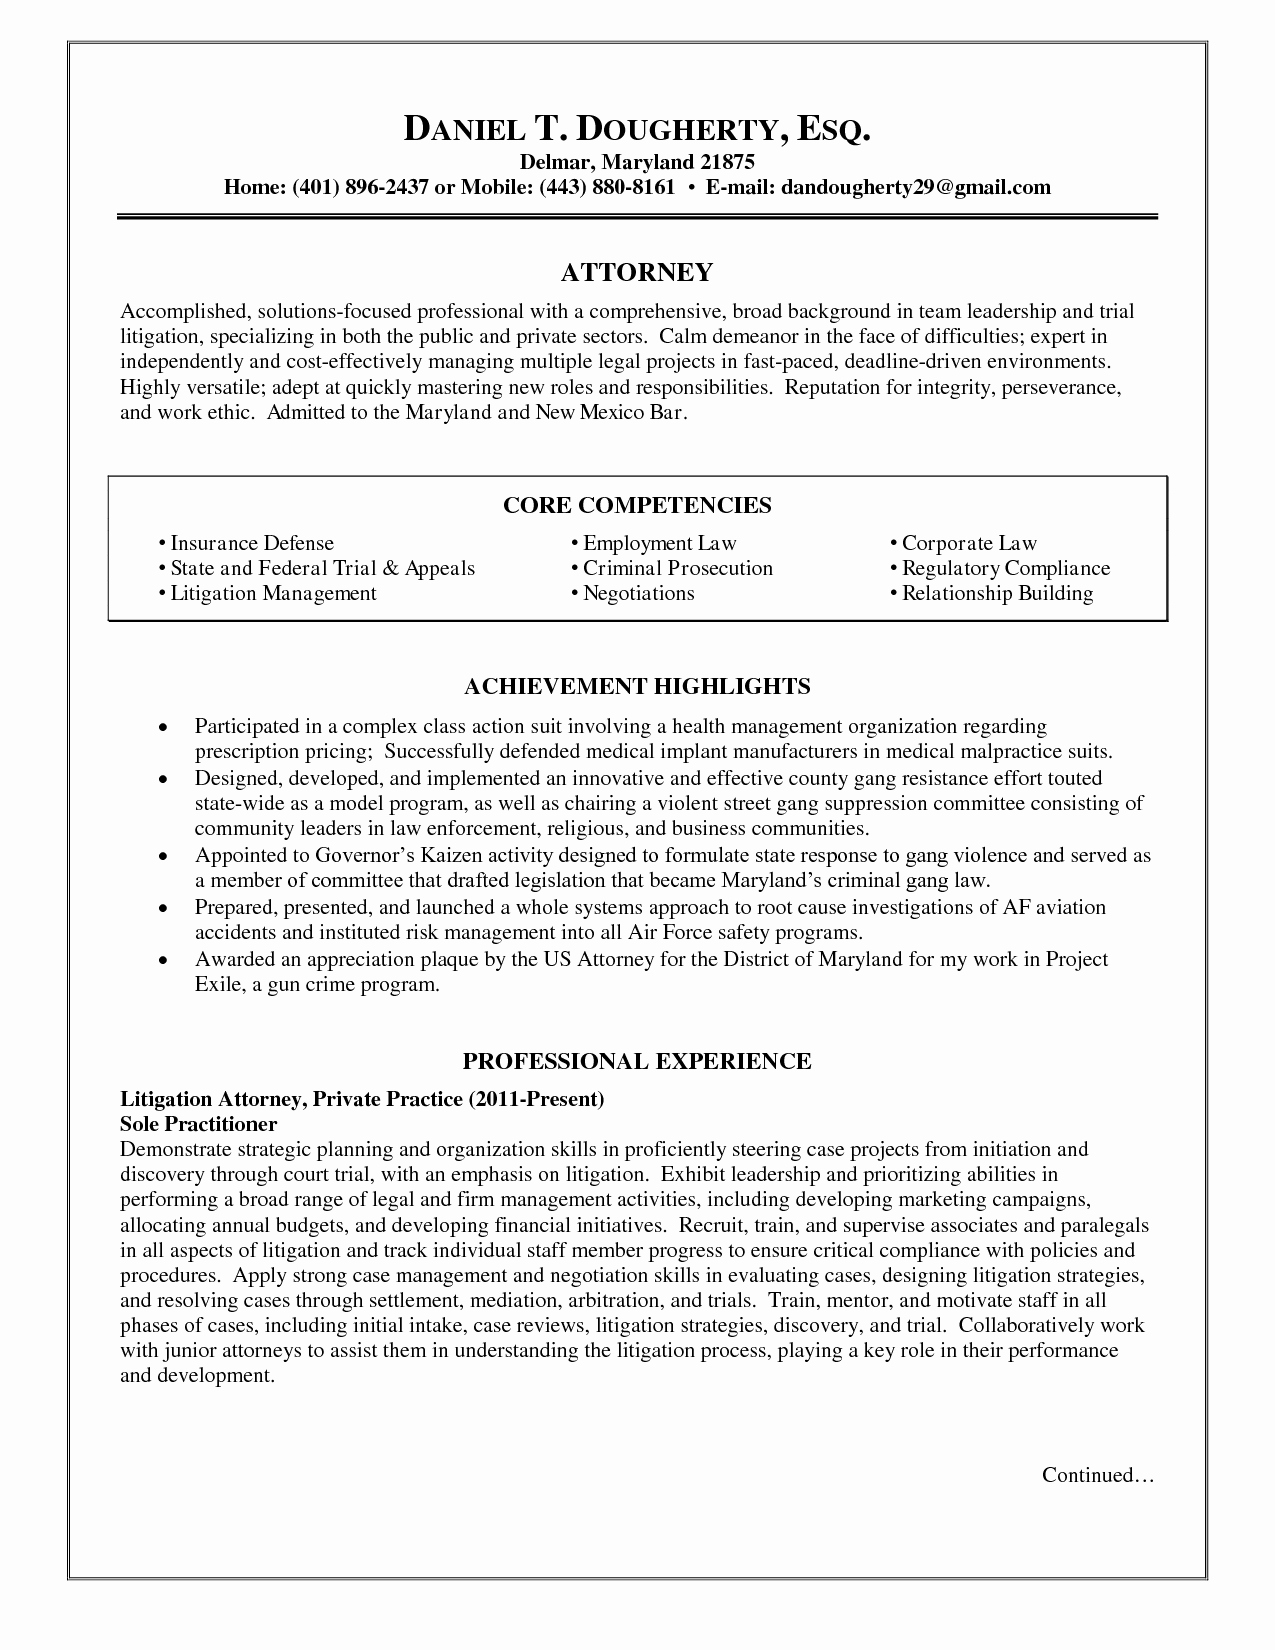 Legal Resume Template Word New Lawyer Resume Document Review Document Review attorney